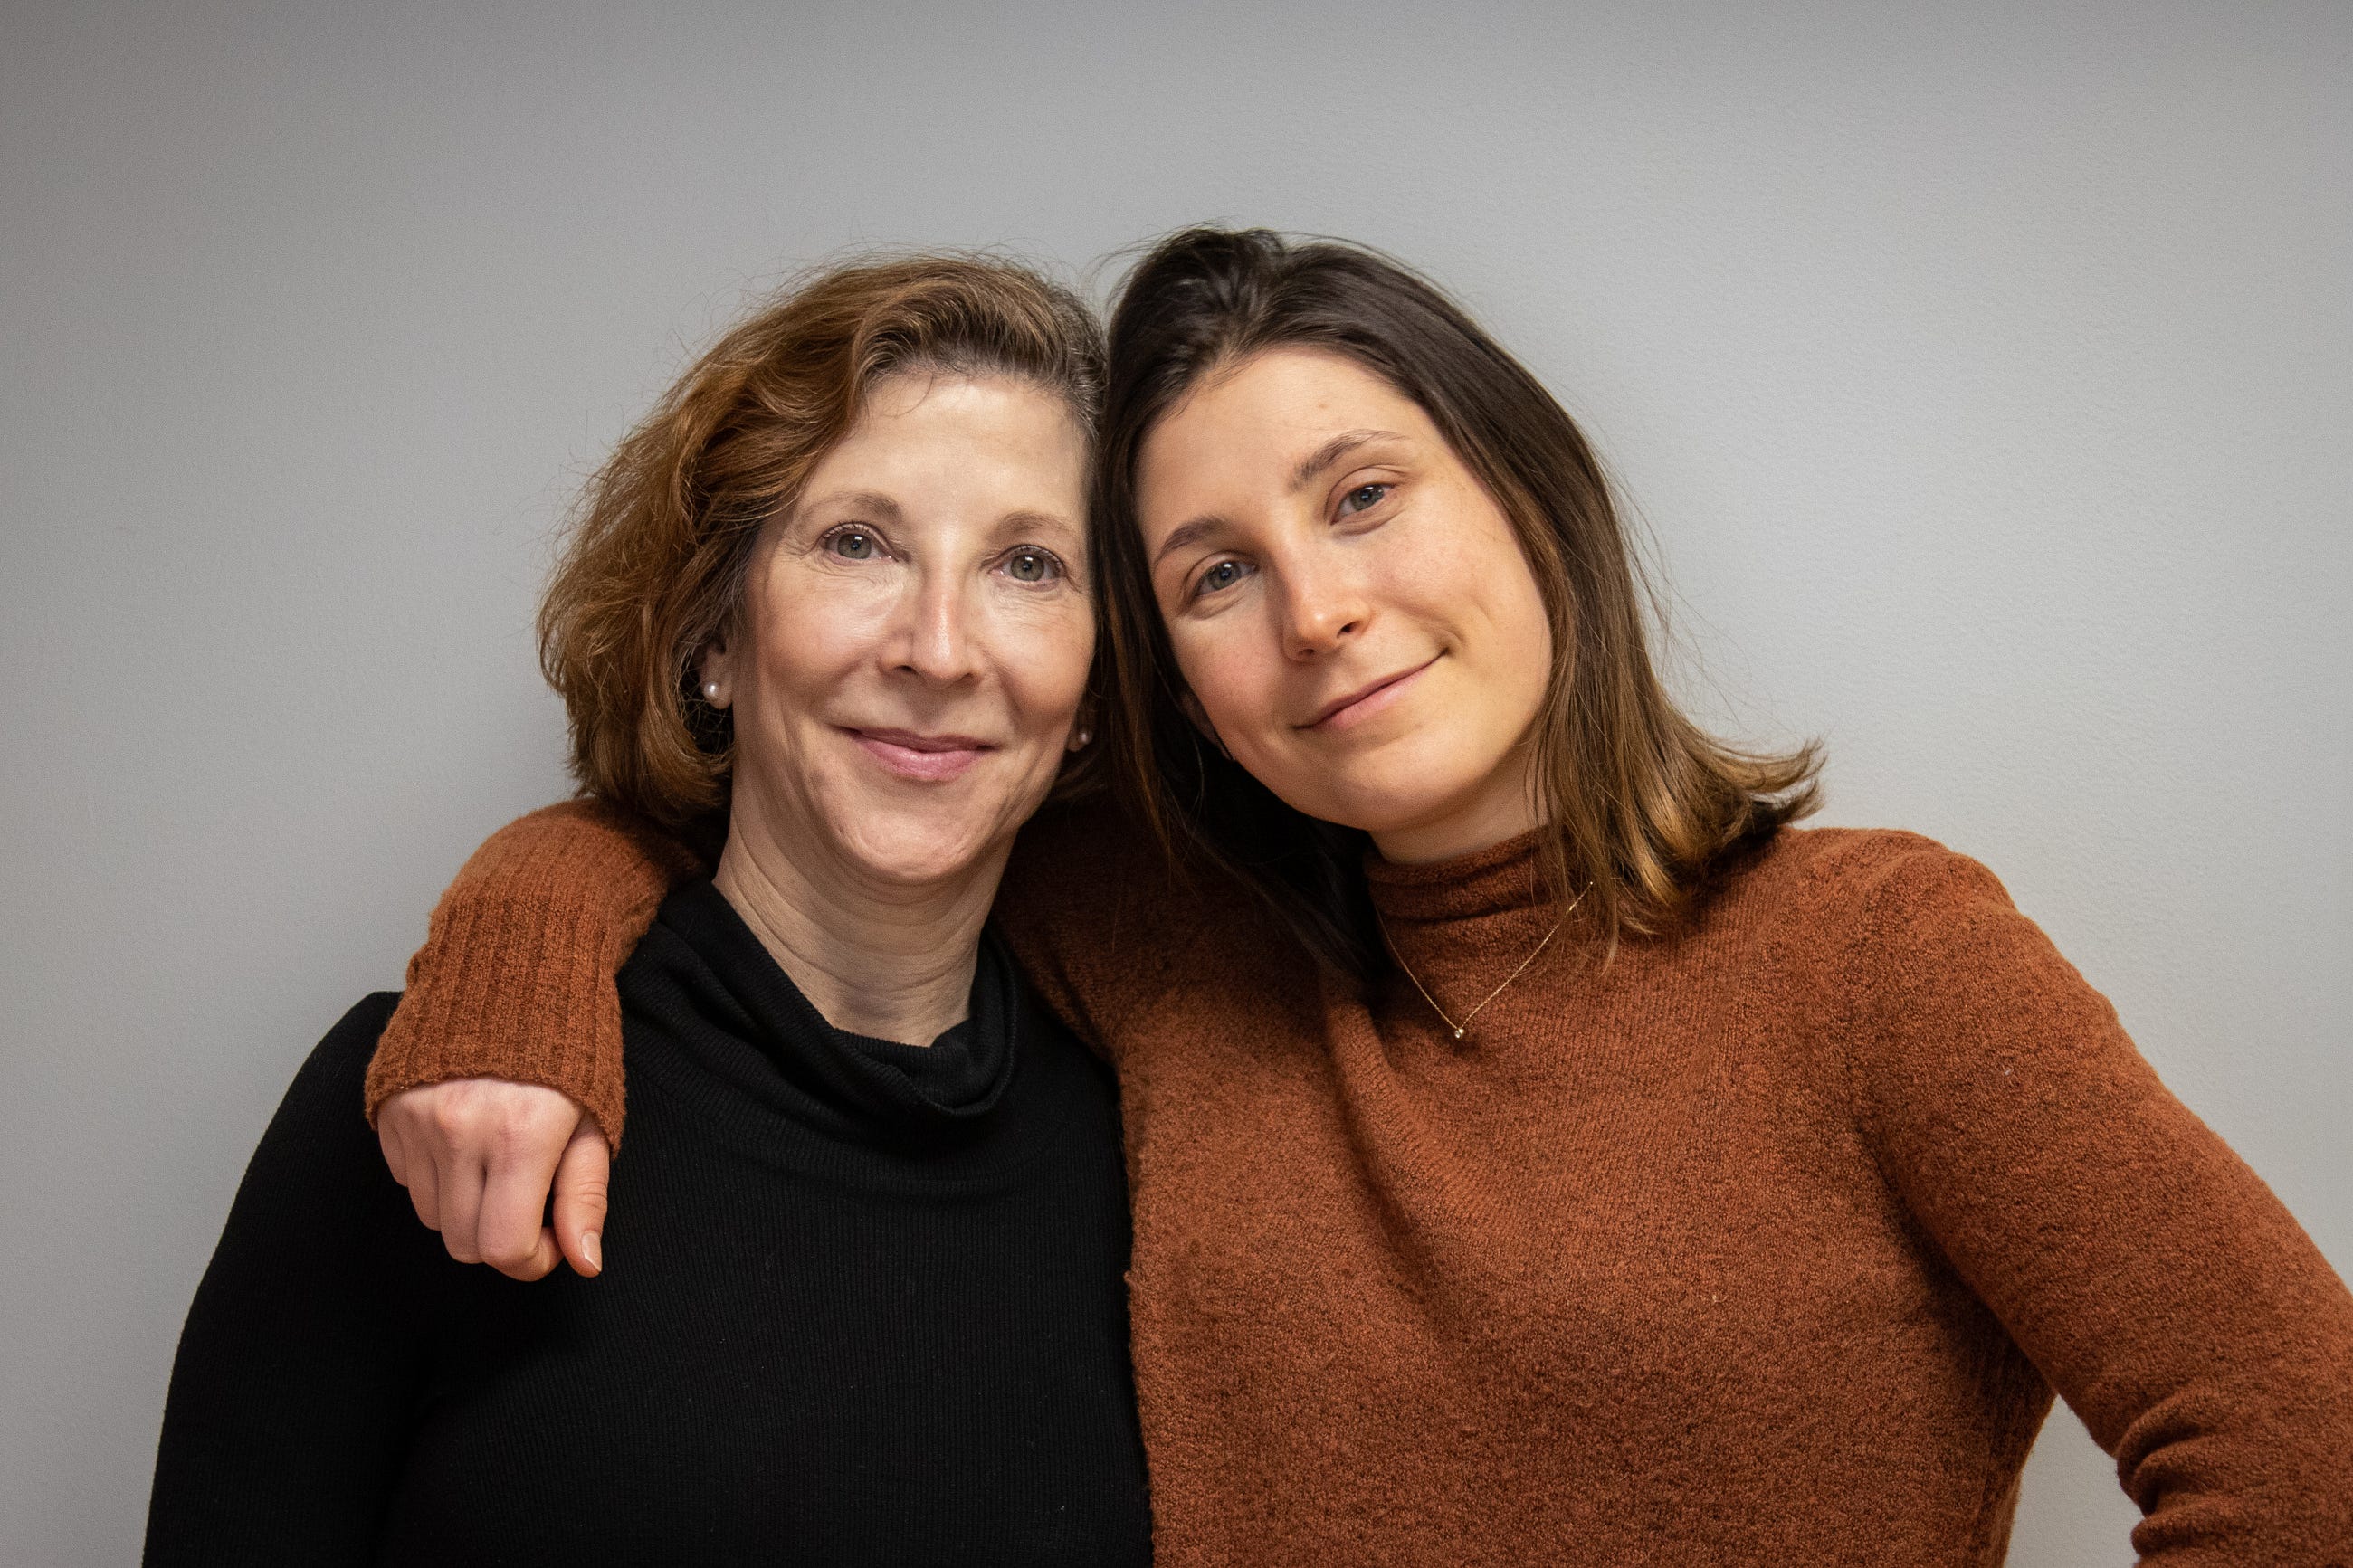 The Female Founder Creating a Product Intended Solely for Men (Alongside her Mom)